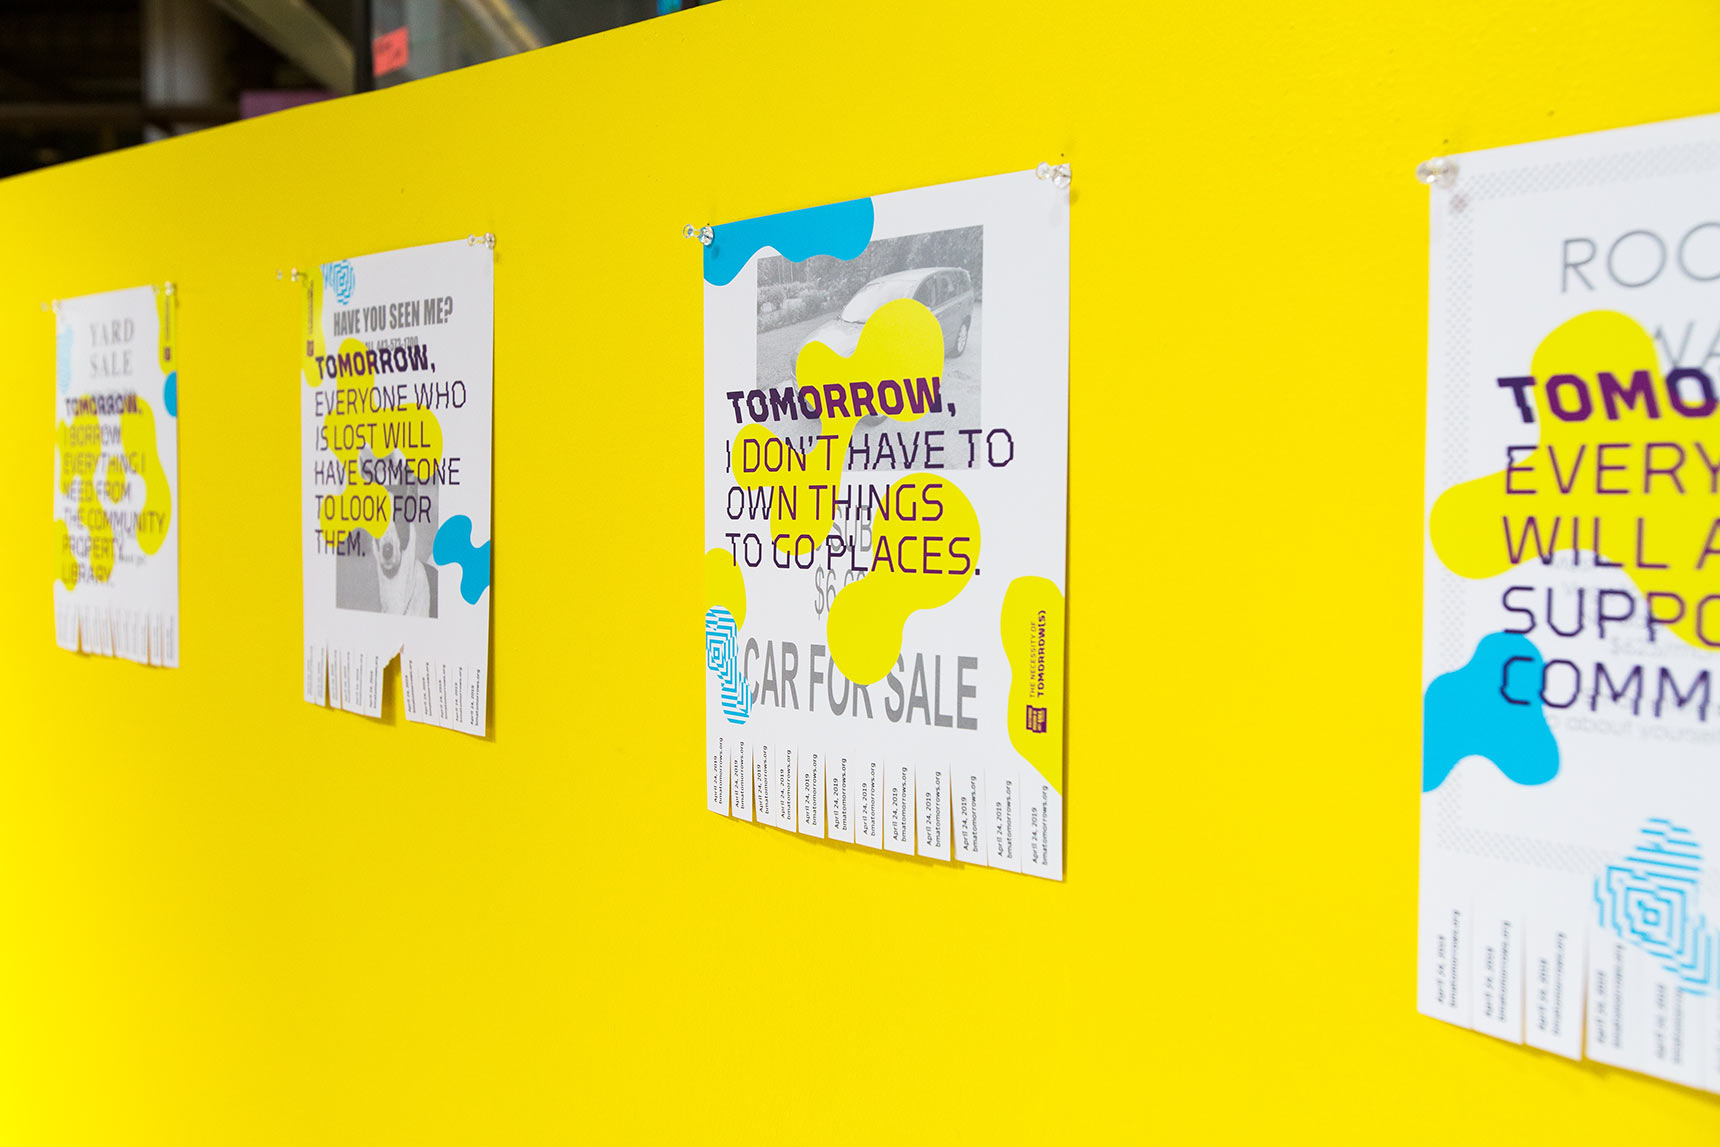 A poster installation at Lexington Market for Baltimore Museum of Art's Necessity of Tomorrow Lecture series